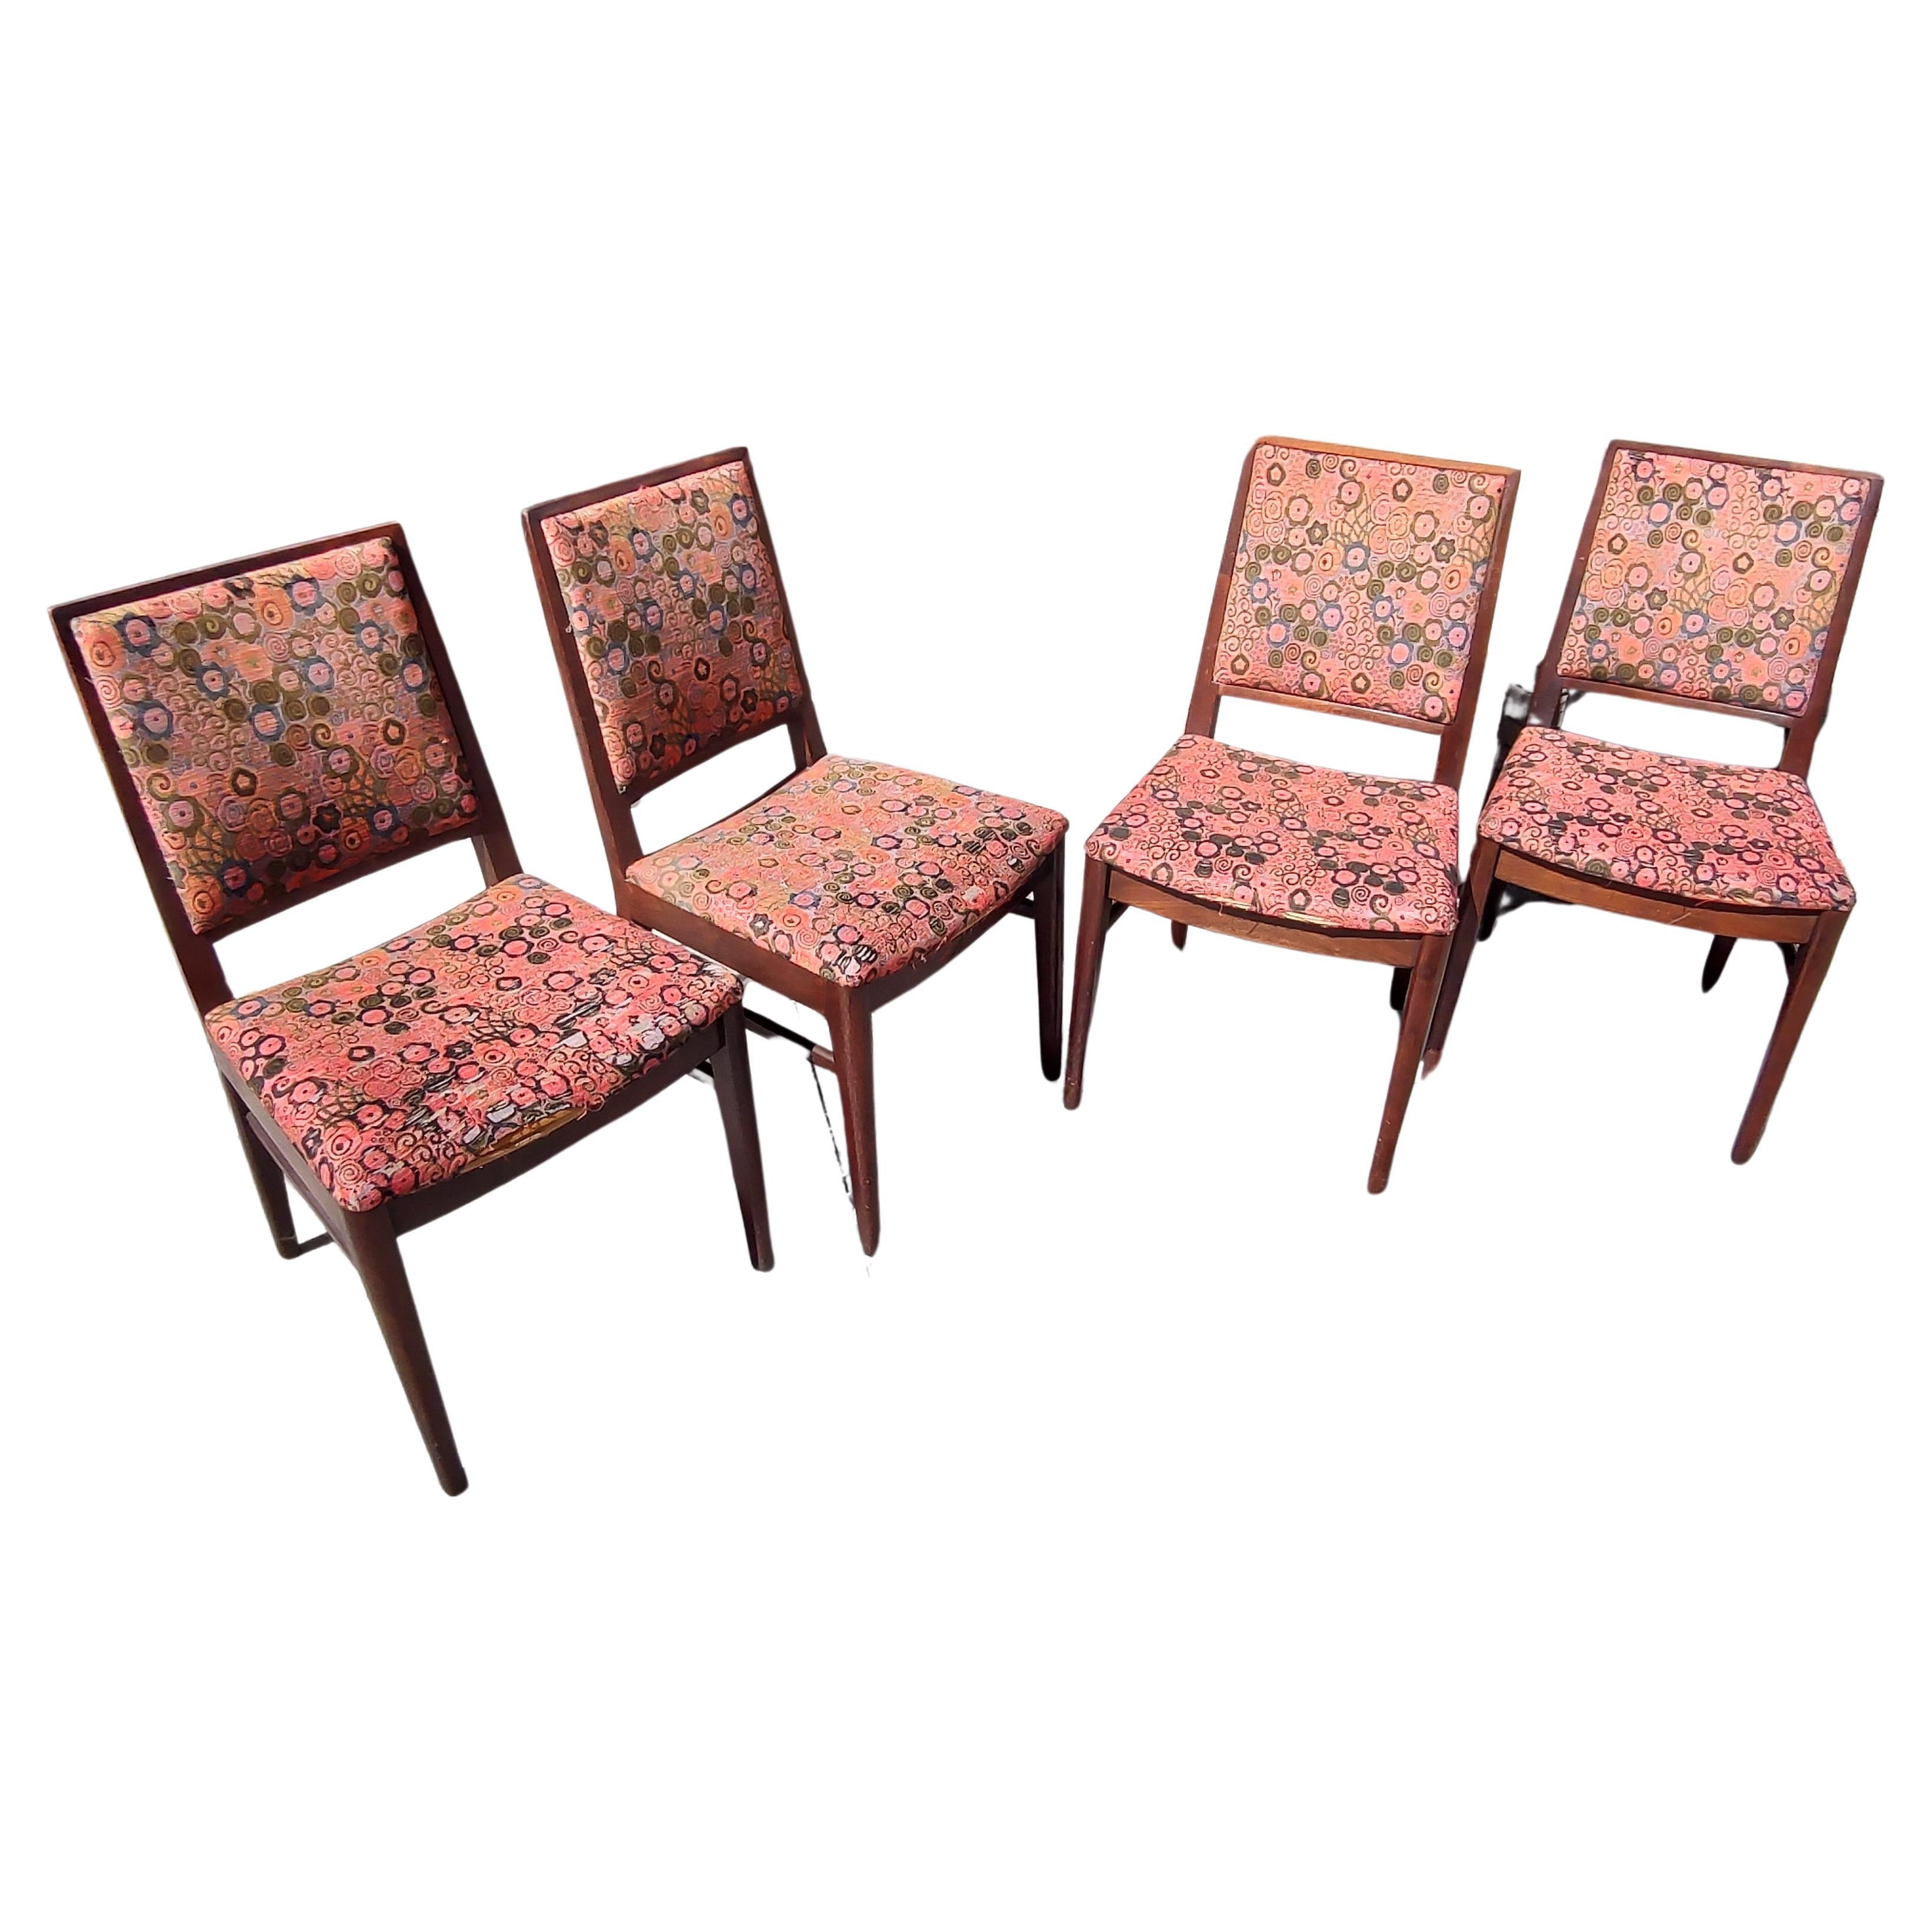 Fabulous set of 4 walnut dining chairs with Jack Lenor Larsen fabric. Fabric is worn at the front edge on 3. Otherwise good vintage condition. Walnut is near perfect with minor scuffs.